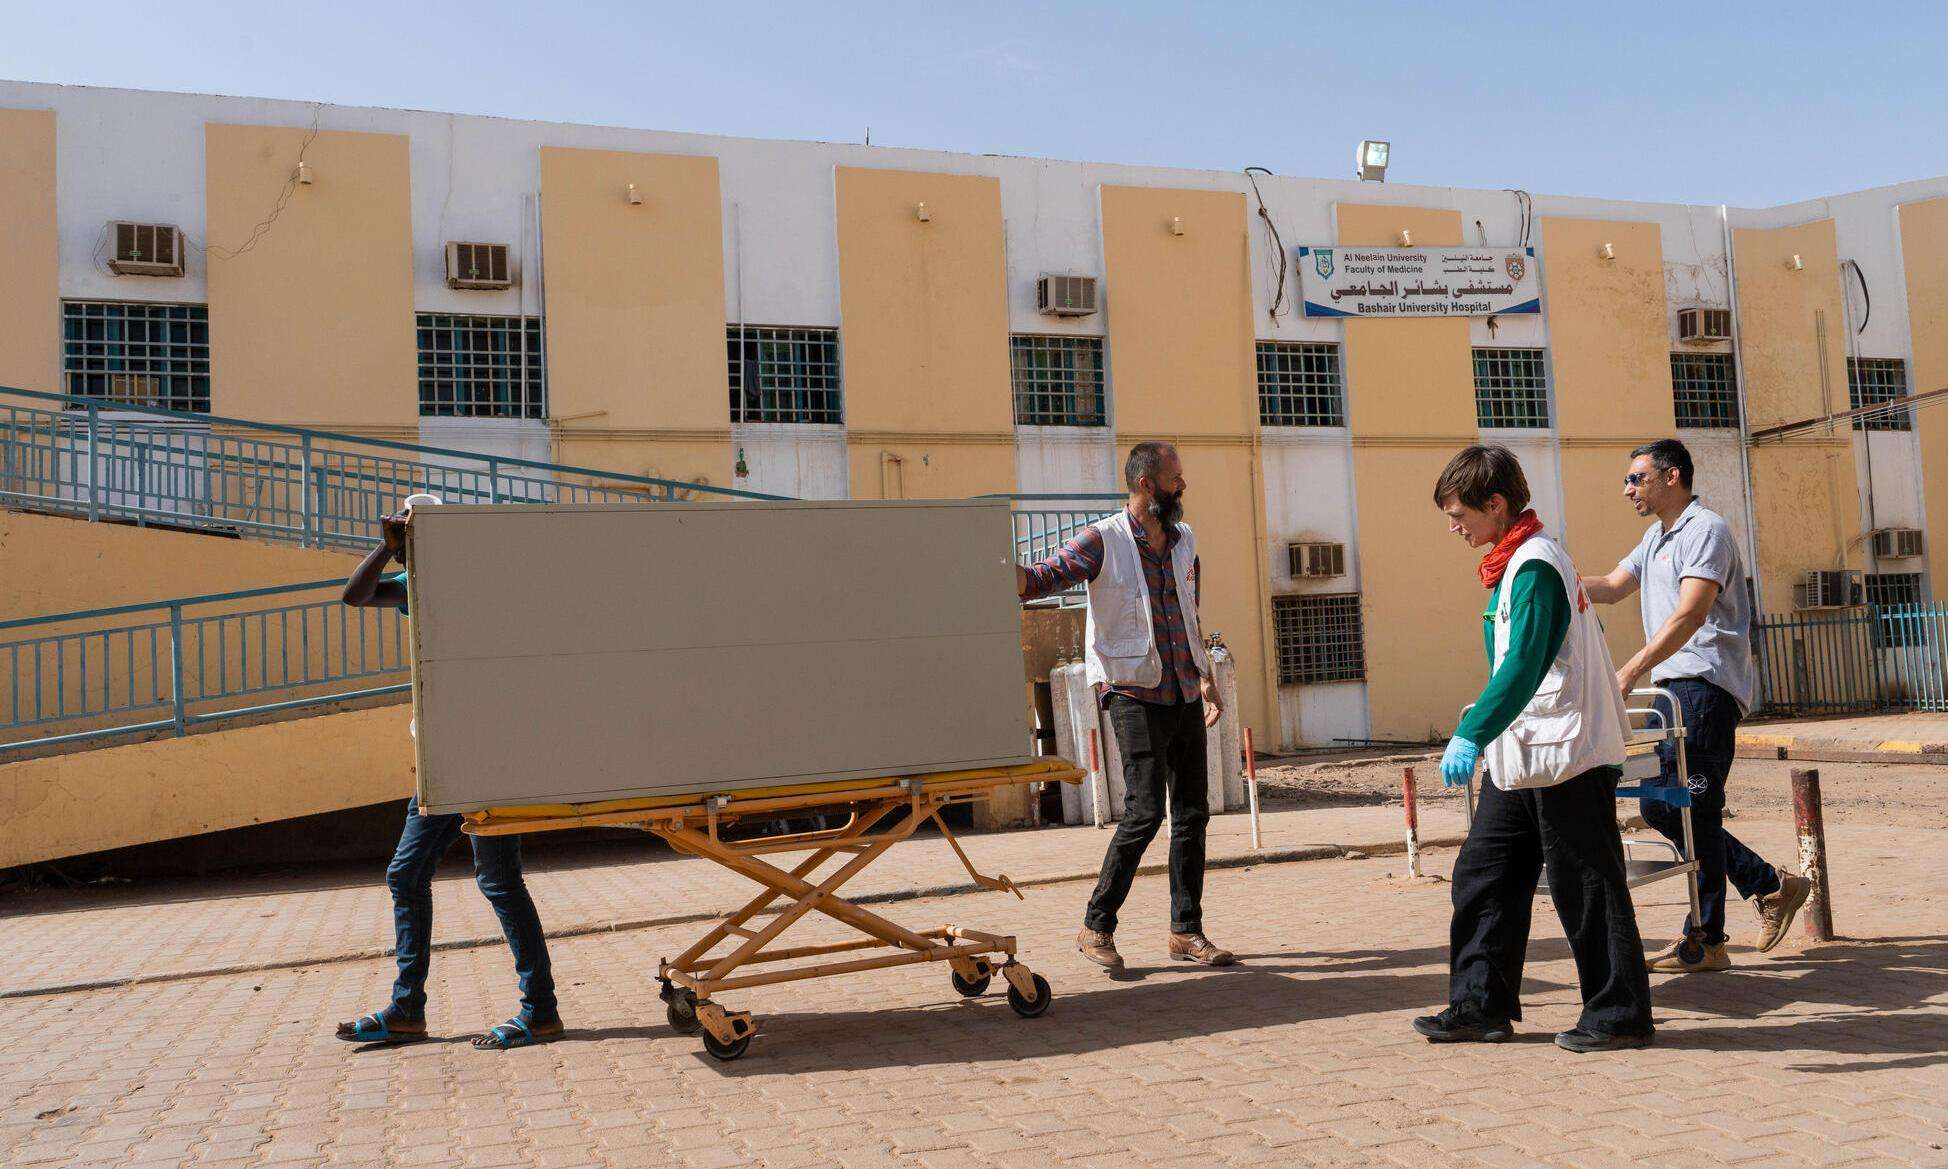 A group of MSF staff push a large object on wheels in front of a yellow building in Khartoum, Sudan.